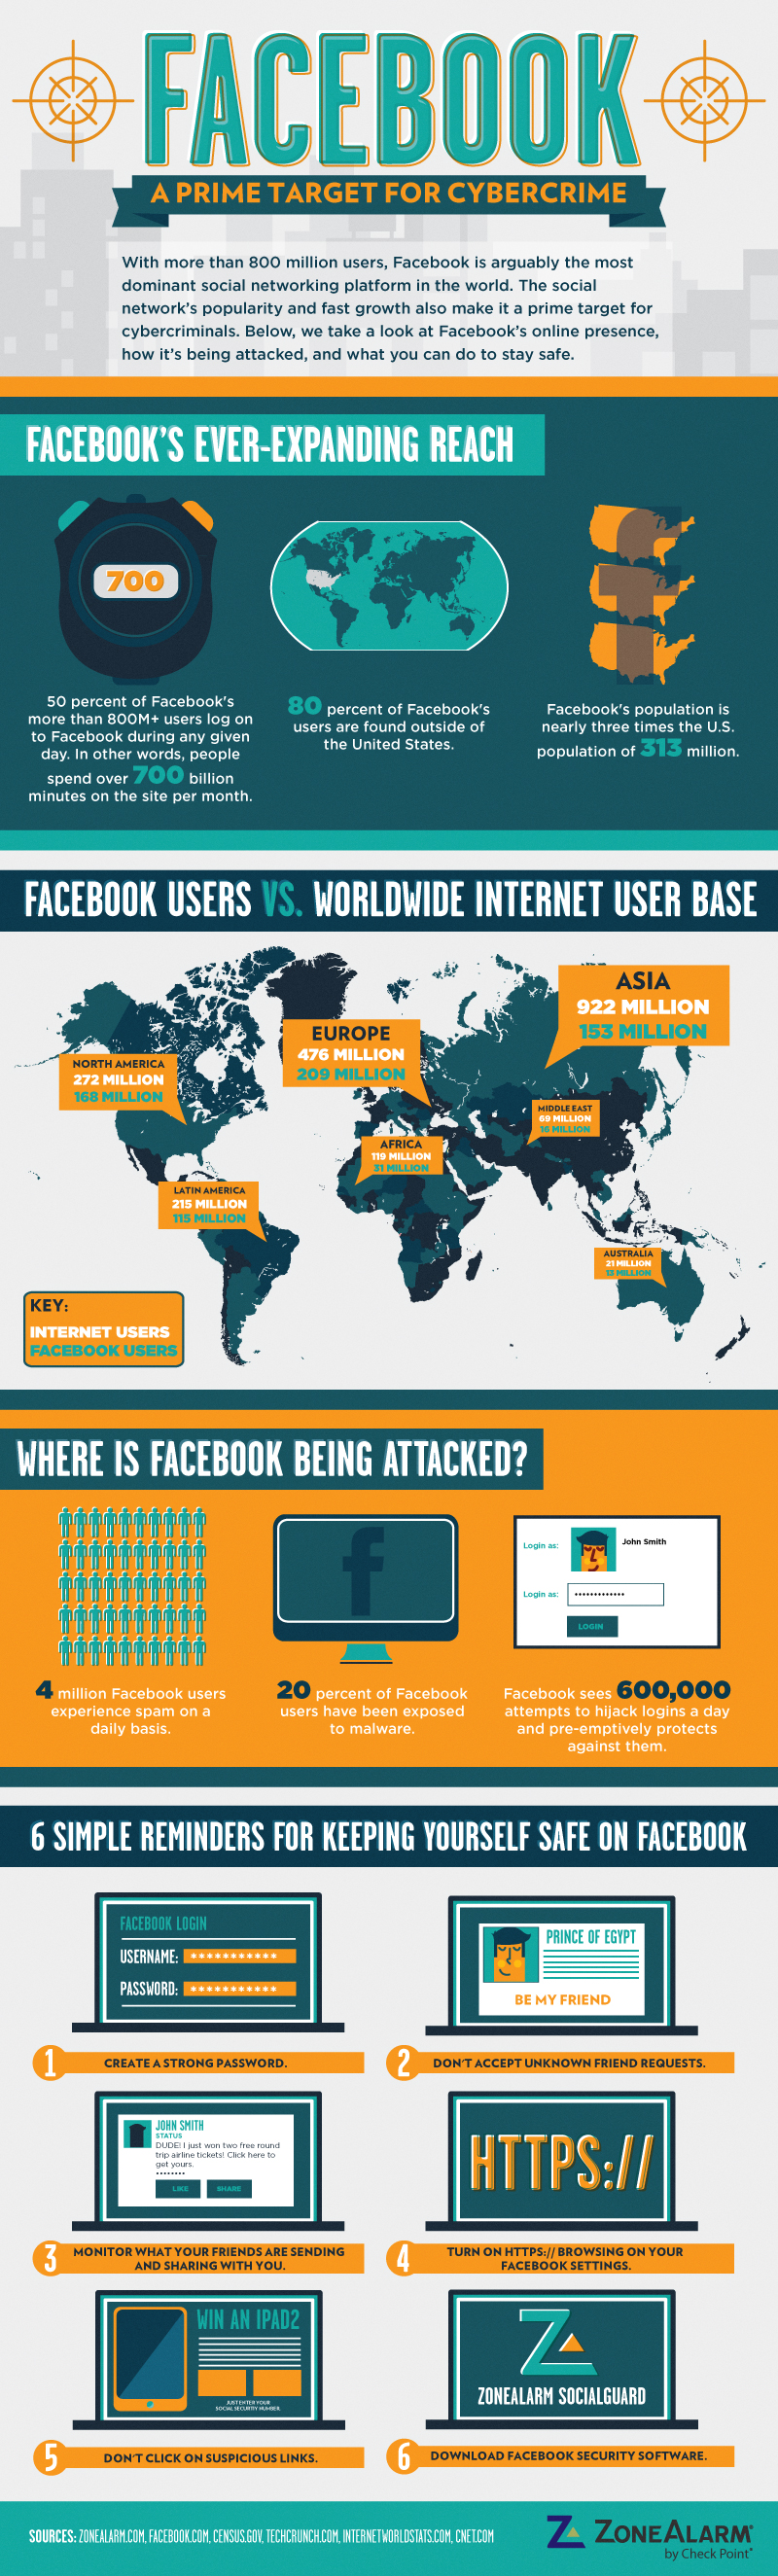 [Infographic] Facebook’s Huge Crowd, How It’s Attacked & How You Can Stay Safe